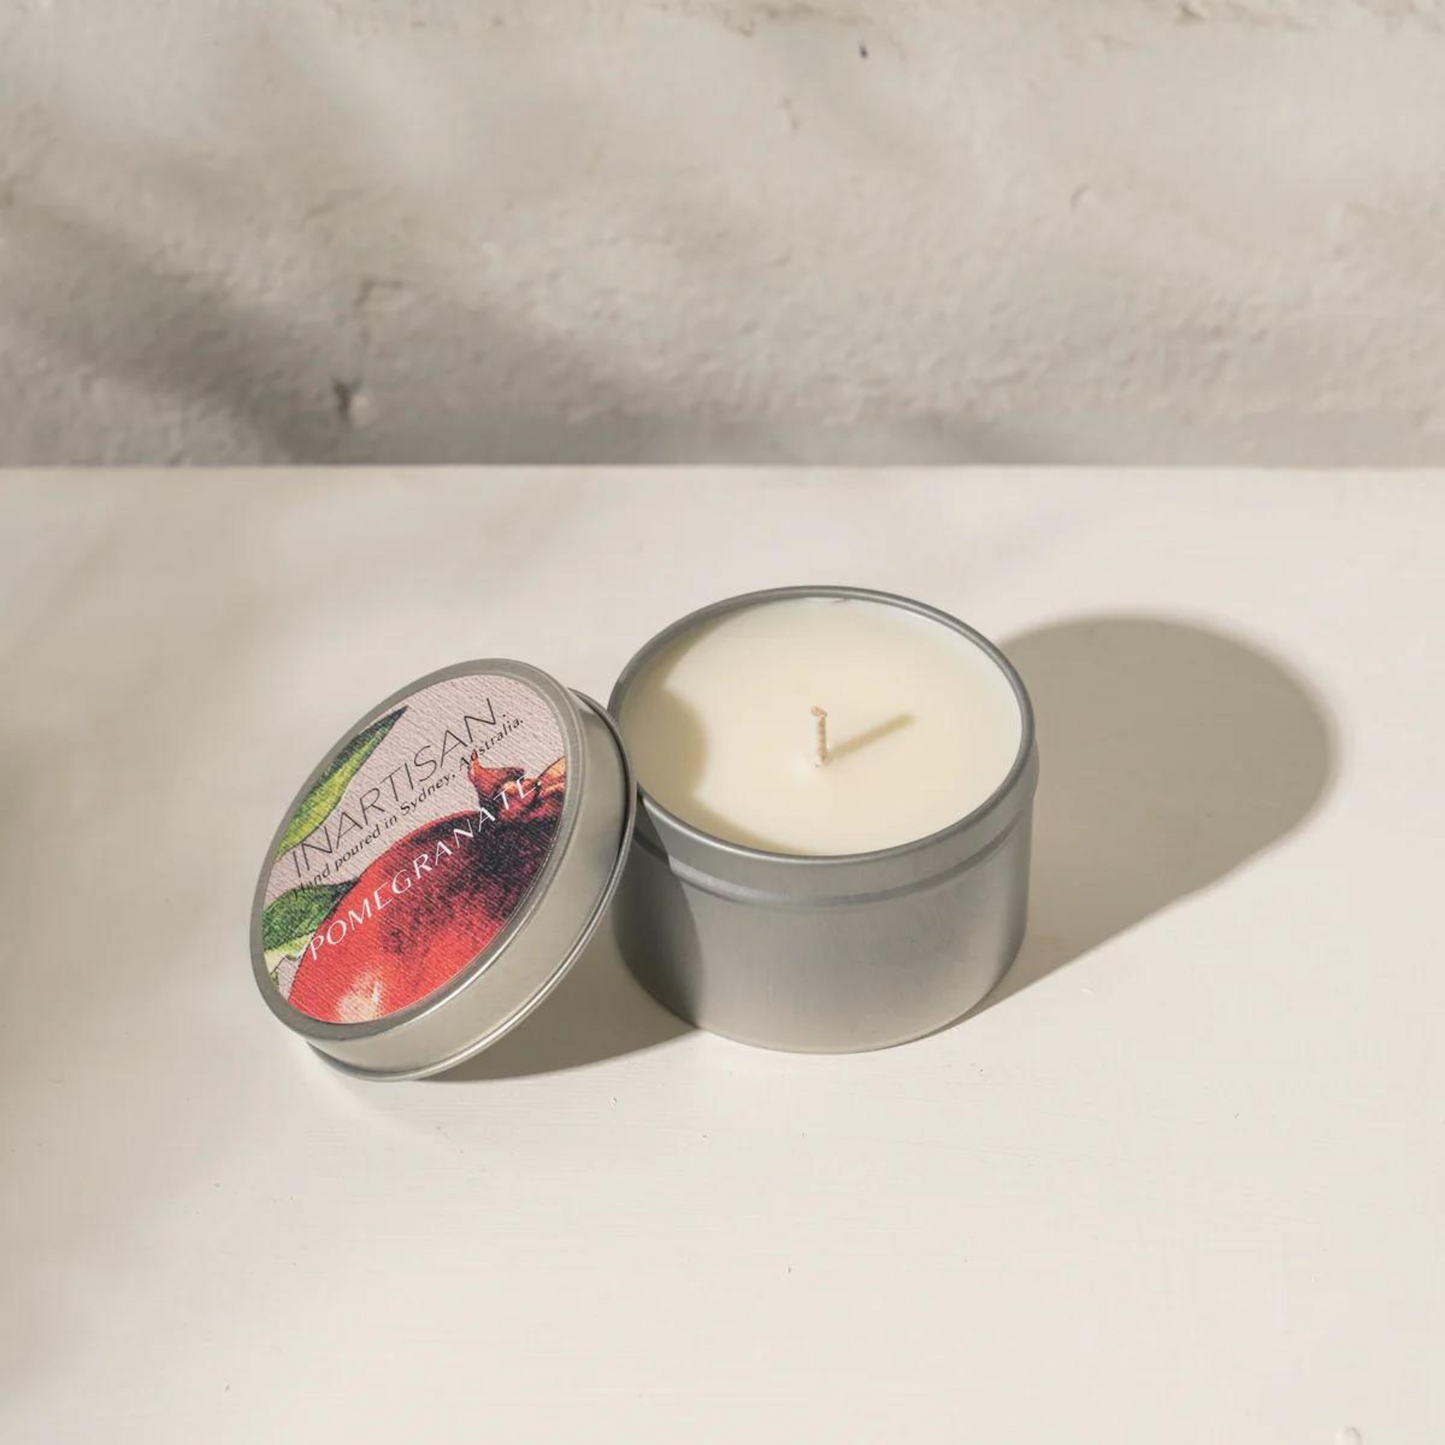 Inartisan Travel Candle - Pomegranate